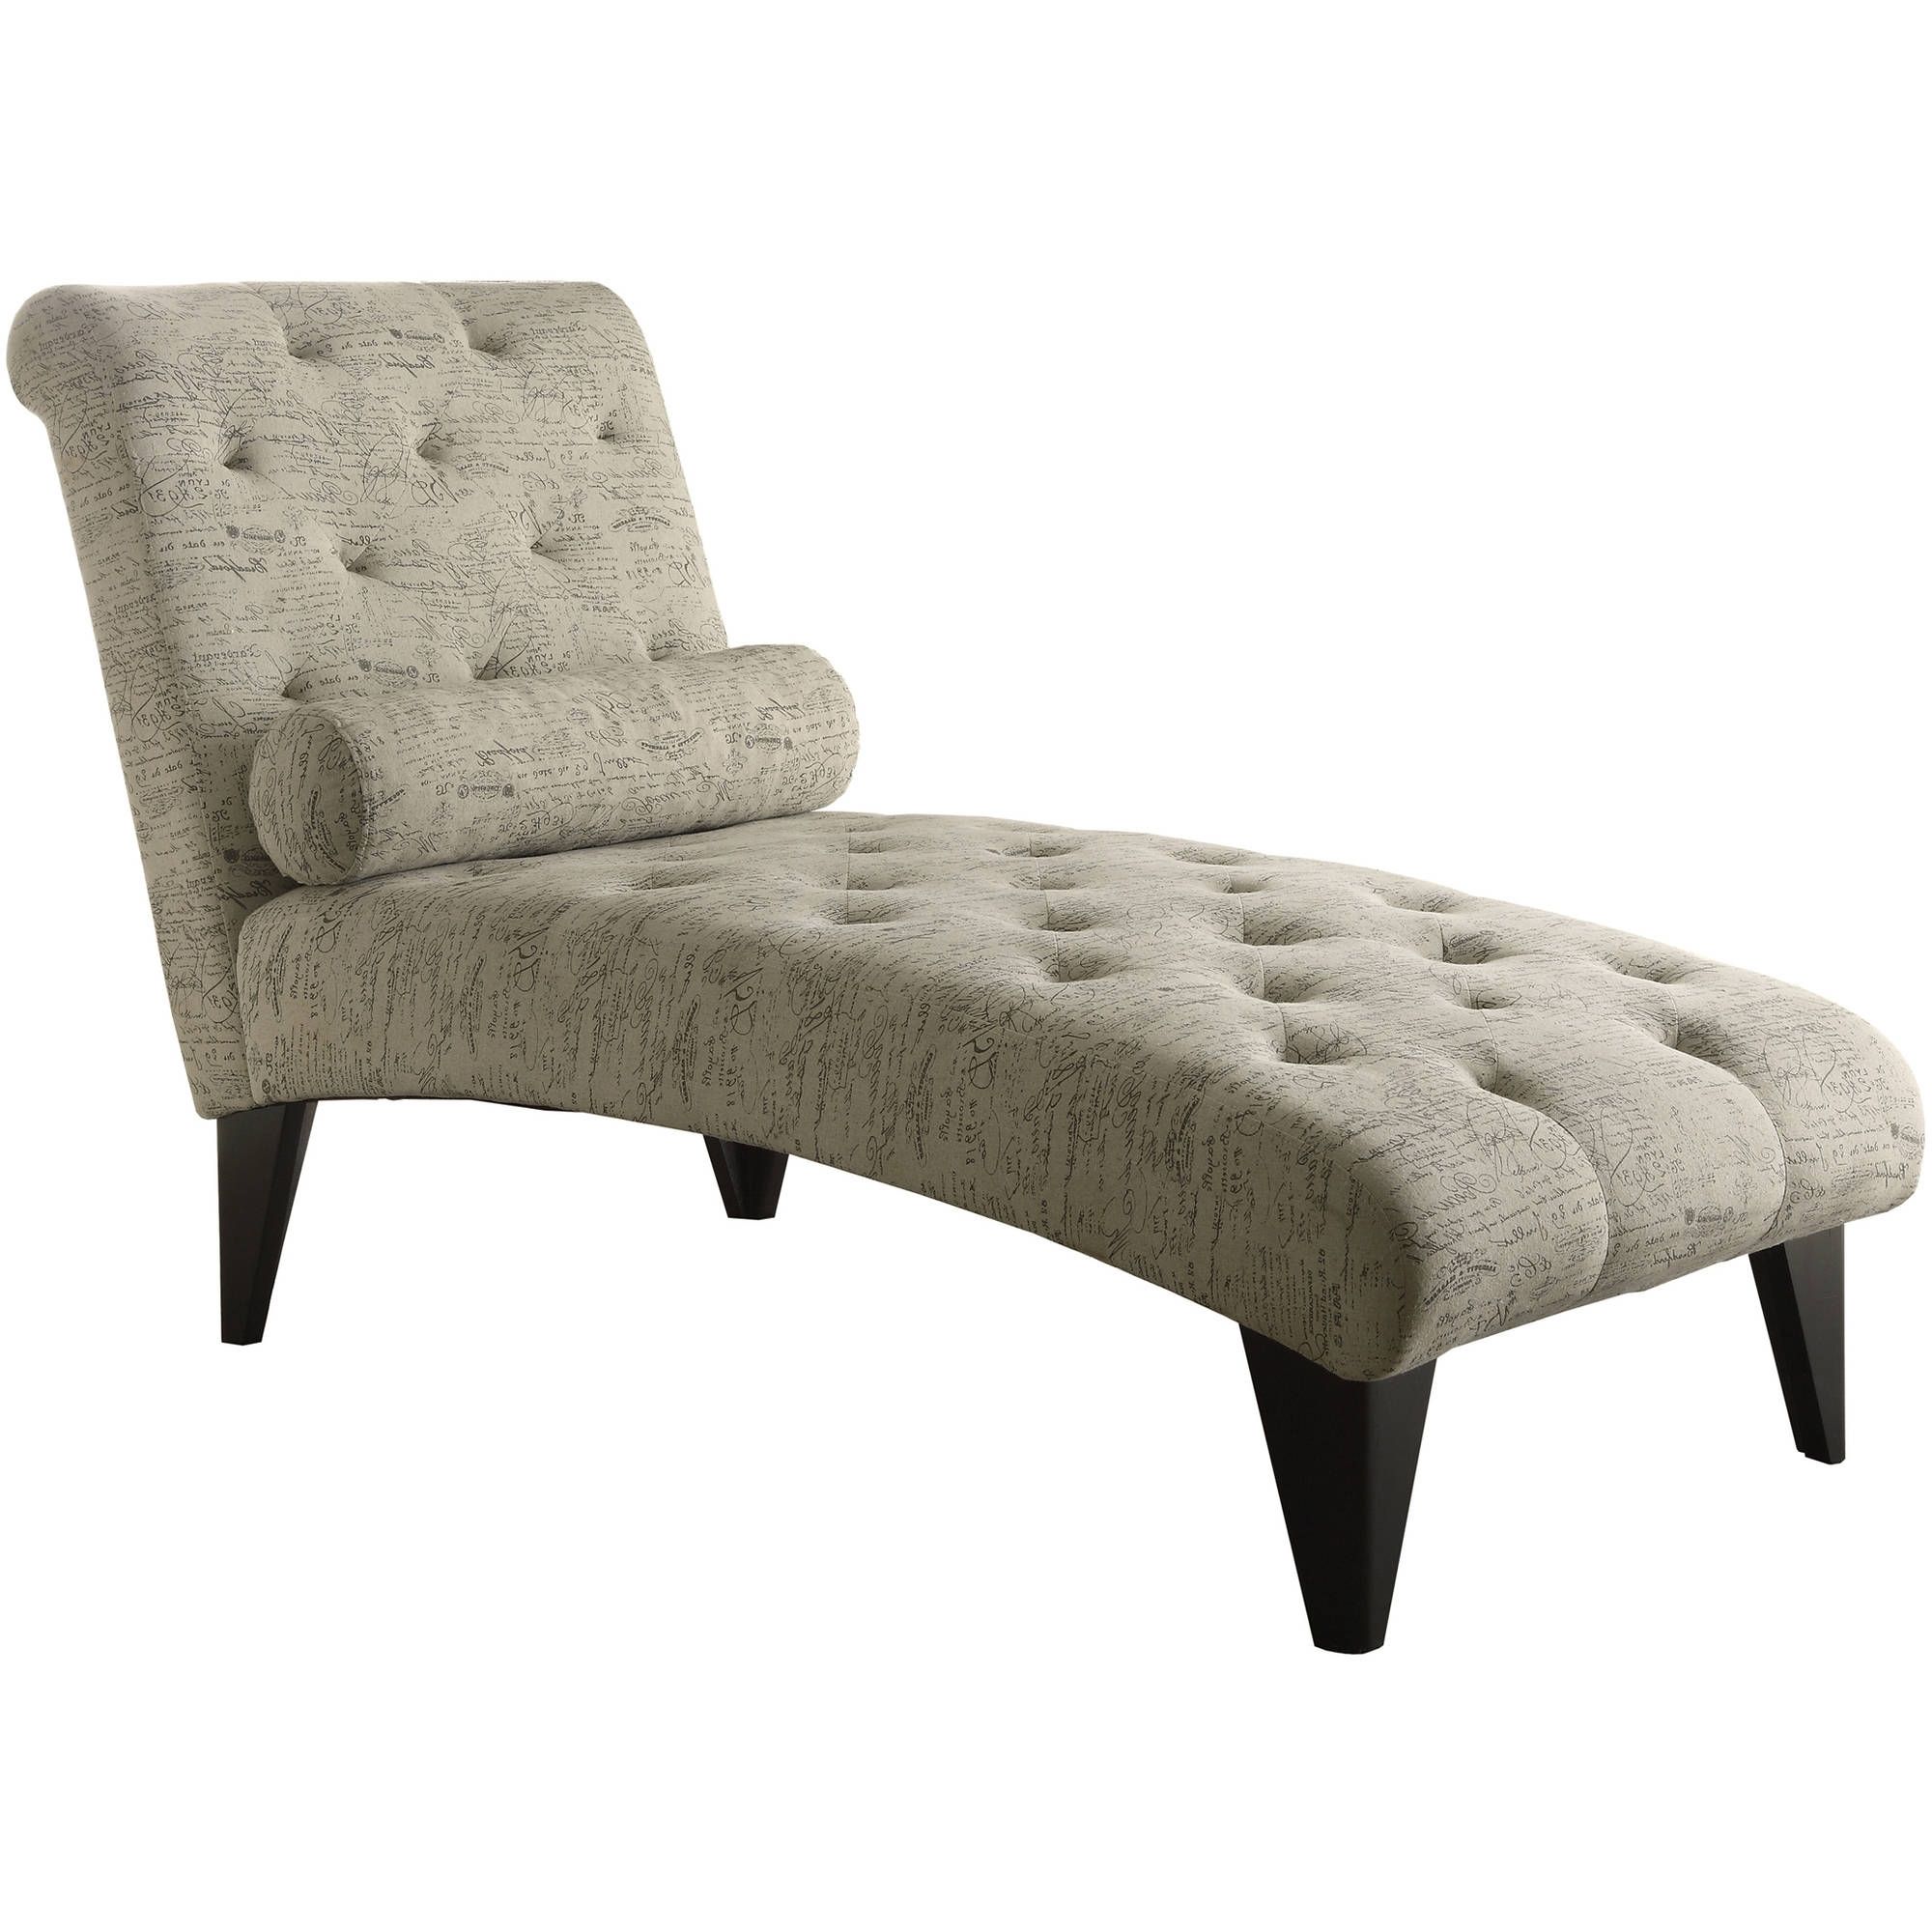 Favorite Chaise Lounge Chairs Under $100 Pertaining To Chaise Lounges – Walmart (View 13 of 15)